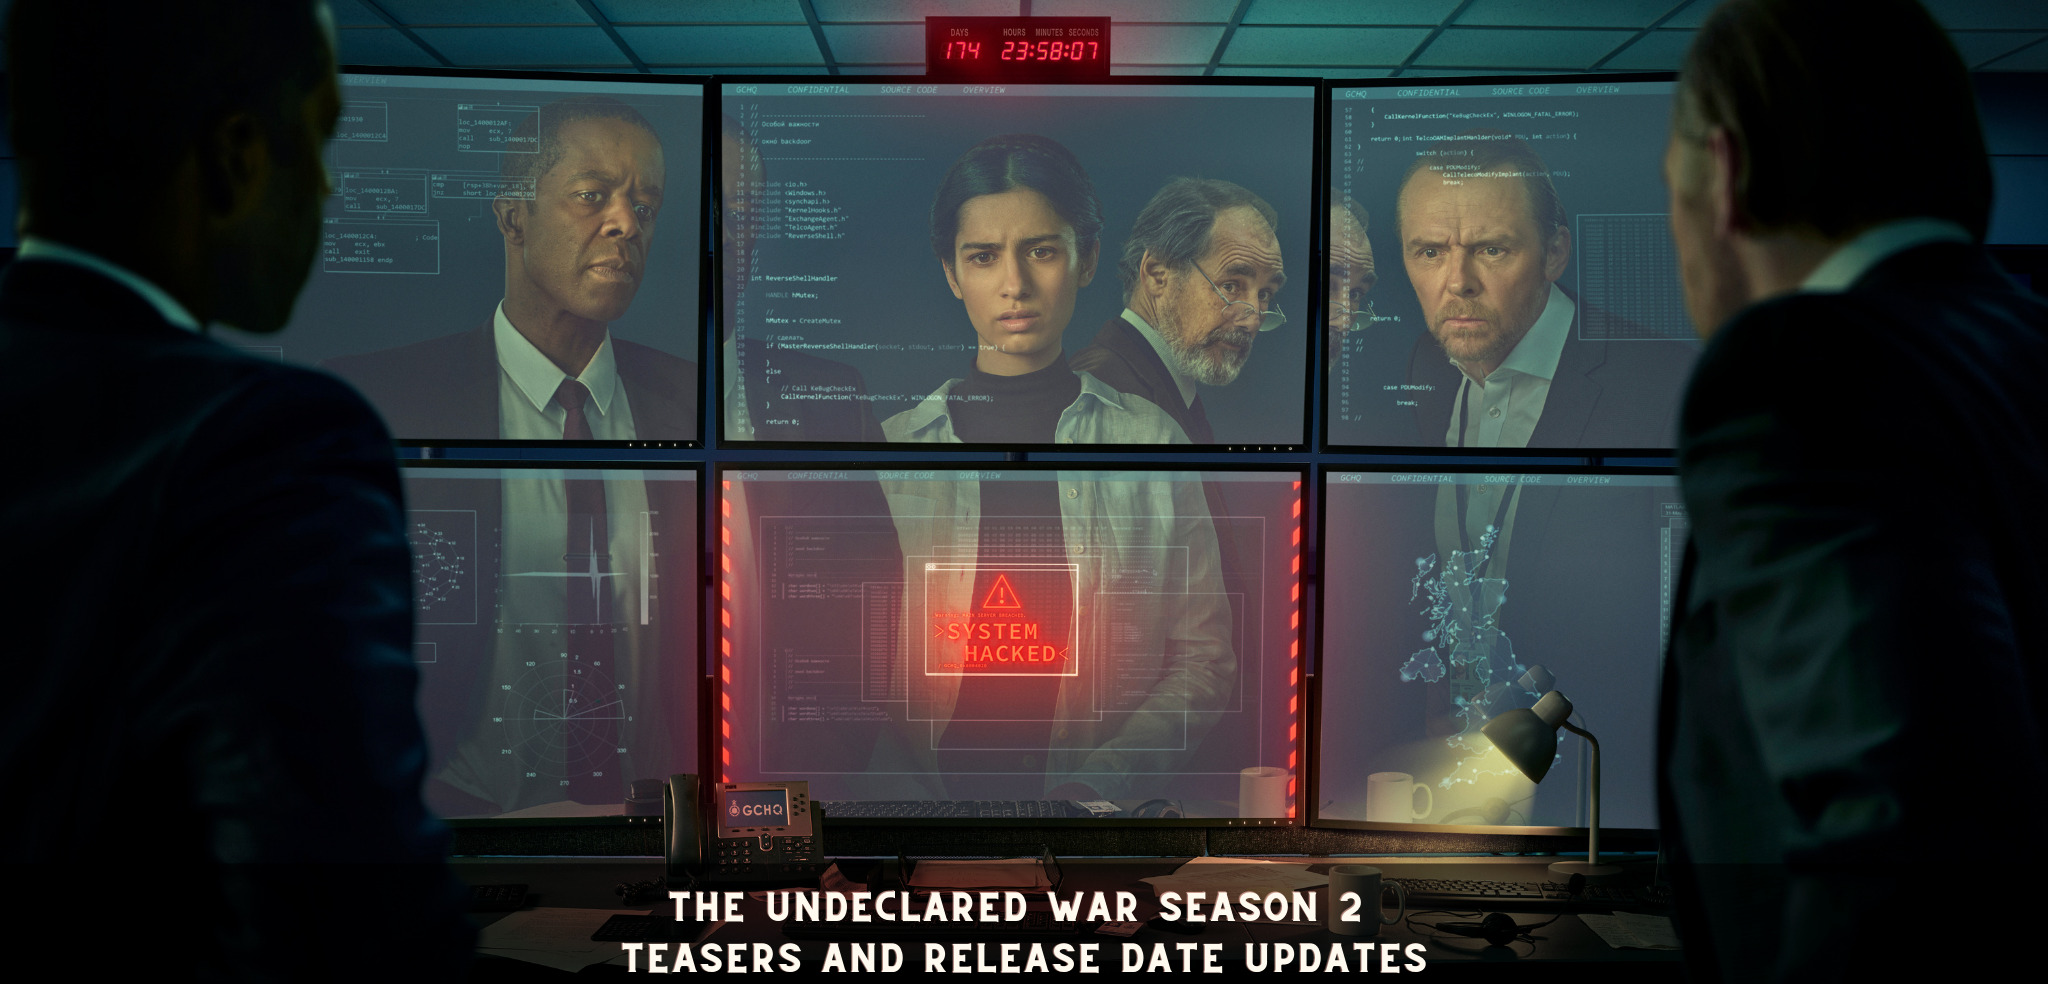 The Undeclared War Season 2 Teasers and Release Date Updates